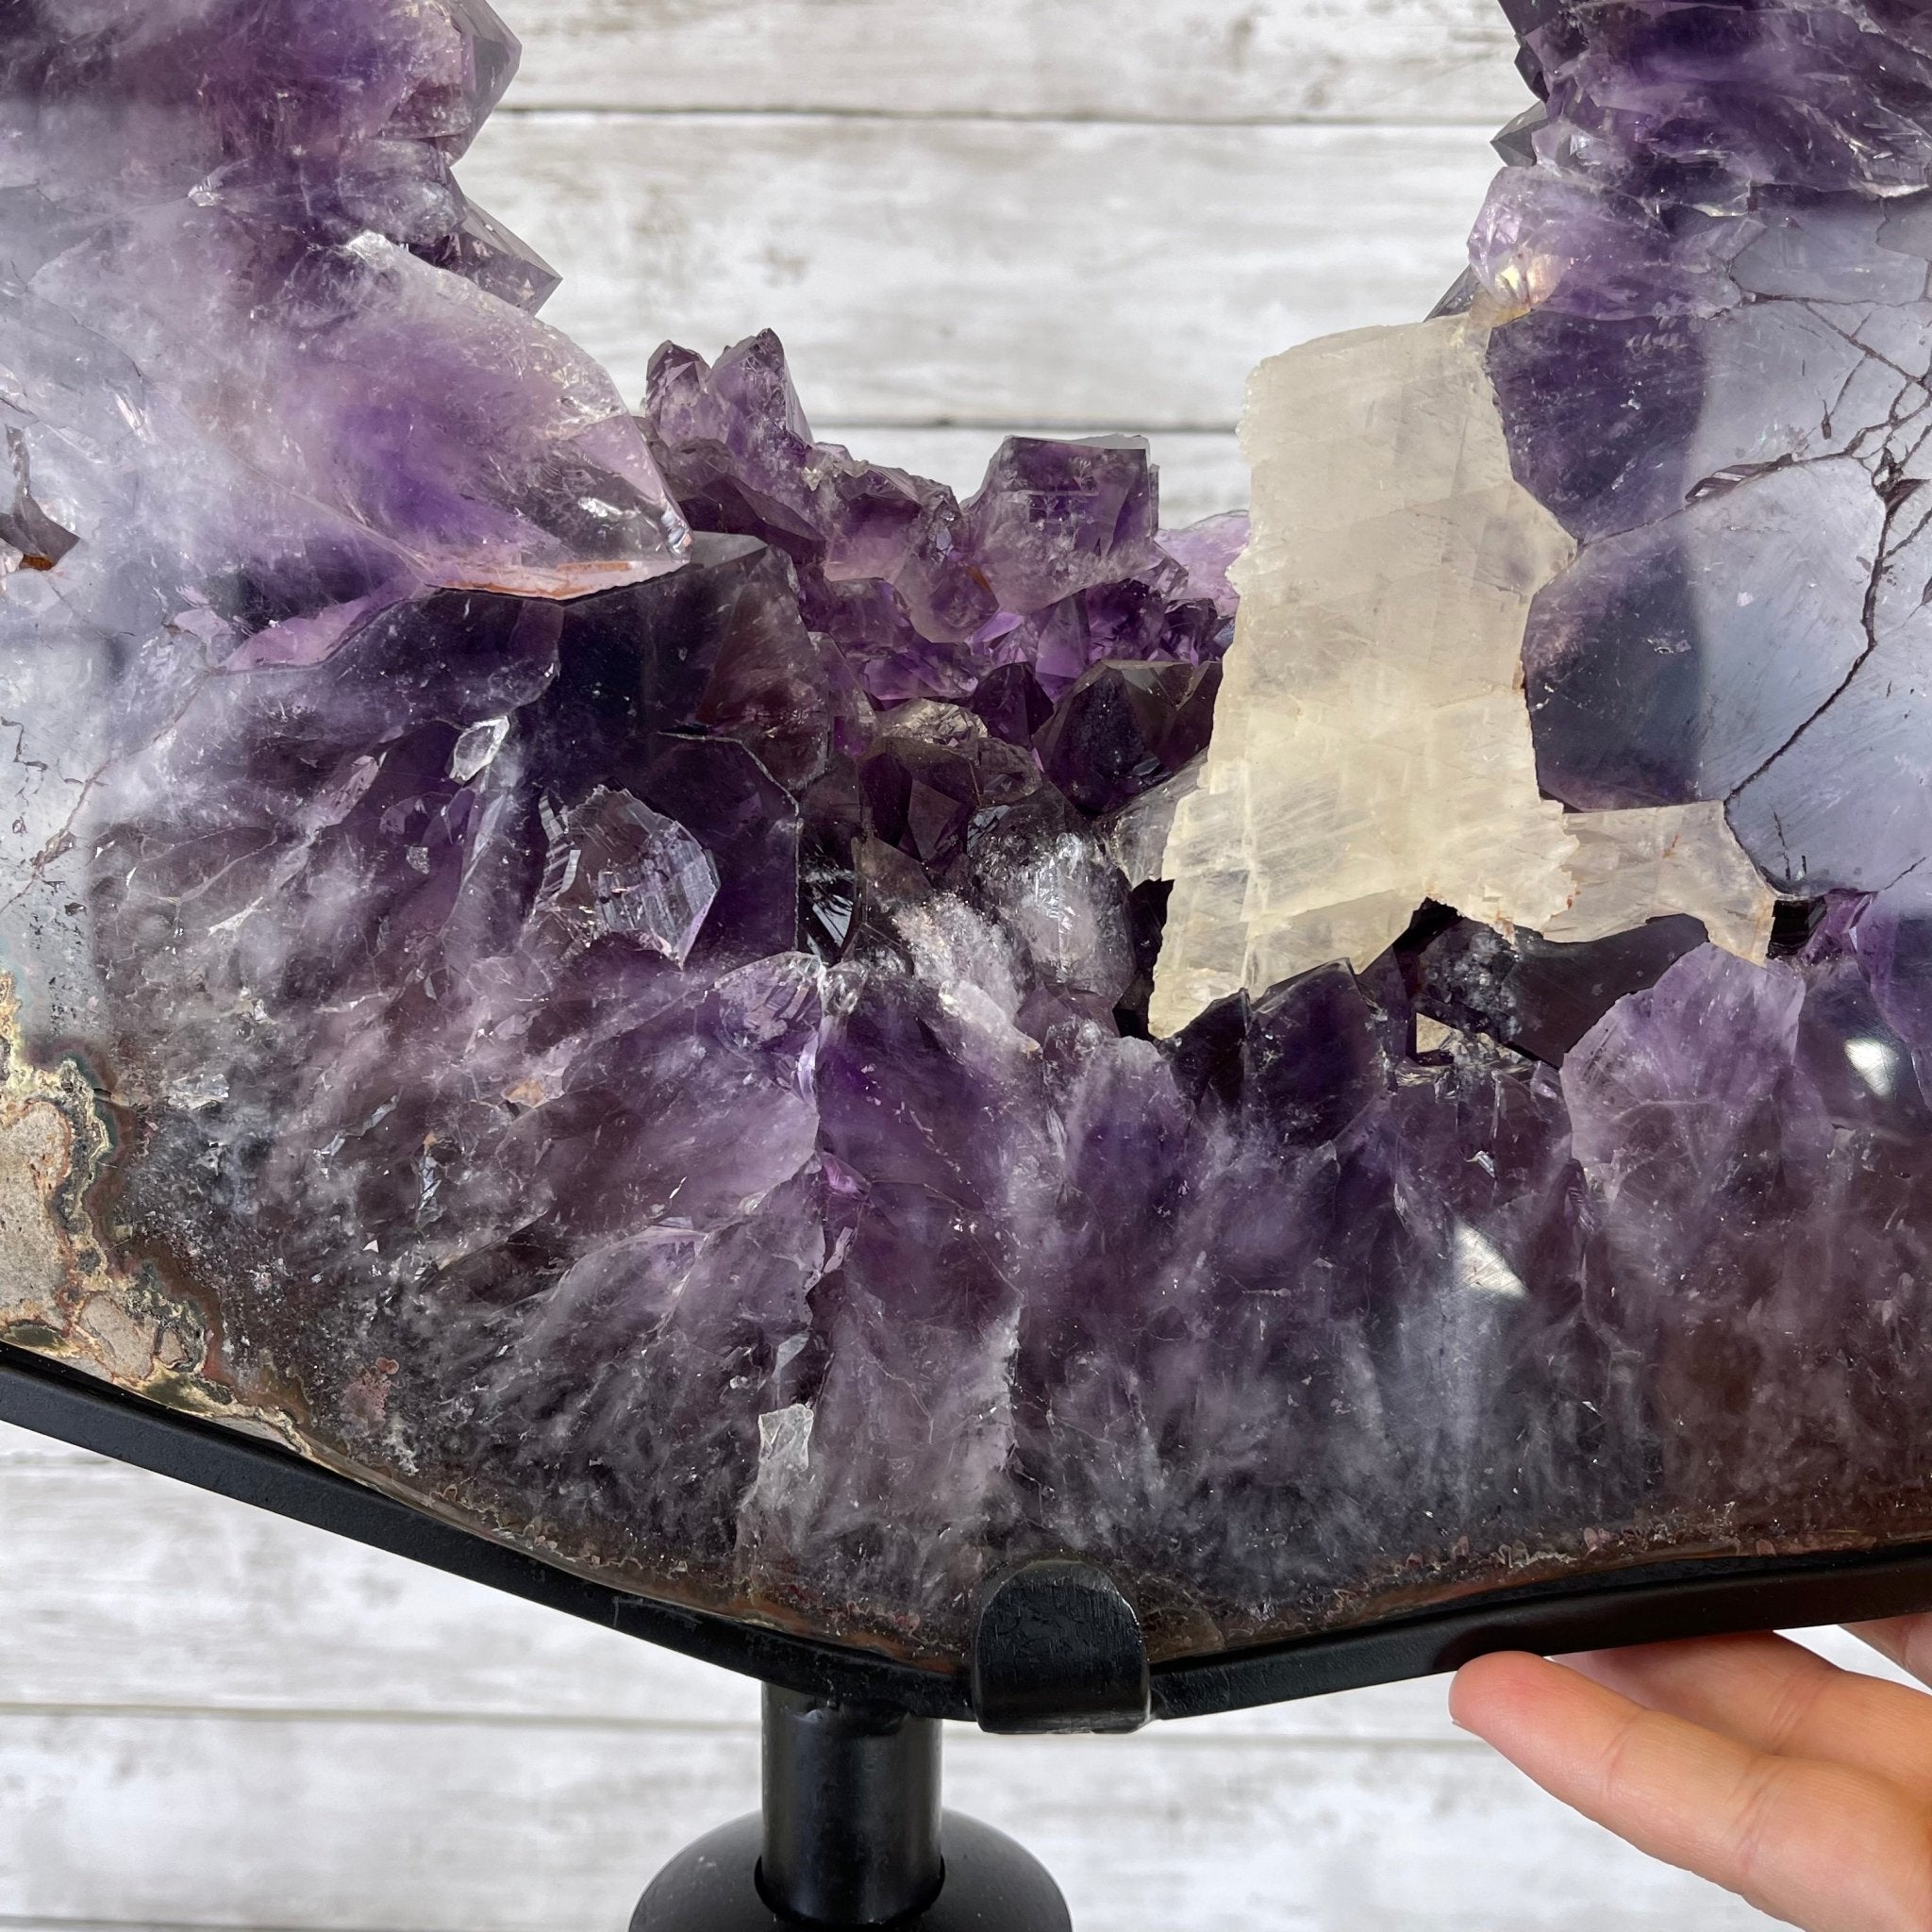 Extra Plus Quality Brazilian Amethyst Crystal Portal on a Tall Rotating Stand, 81.6 lbs & 69.5" tall Model #5604-0099 by Brazil Gems - Brazil GemsBrazil GemsExtra Plus Quality Brazilian Amethyst Crystal Portal on a Tall Rotating Stand, 81.6 lbs & 69.5" tall Model #5604-0099 by Brazil GemsPortals on Rotating Bases5604-0099